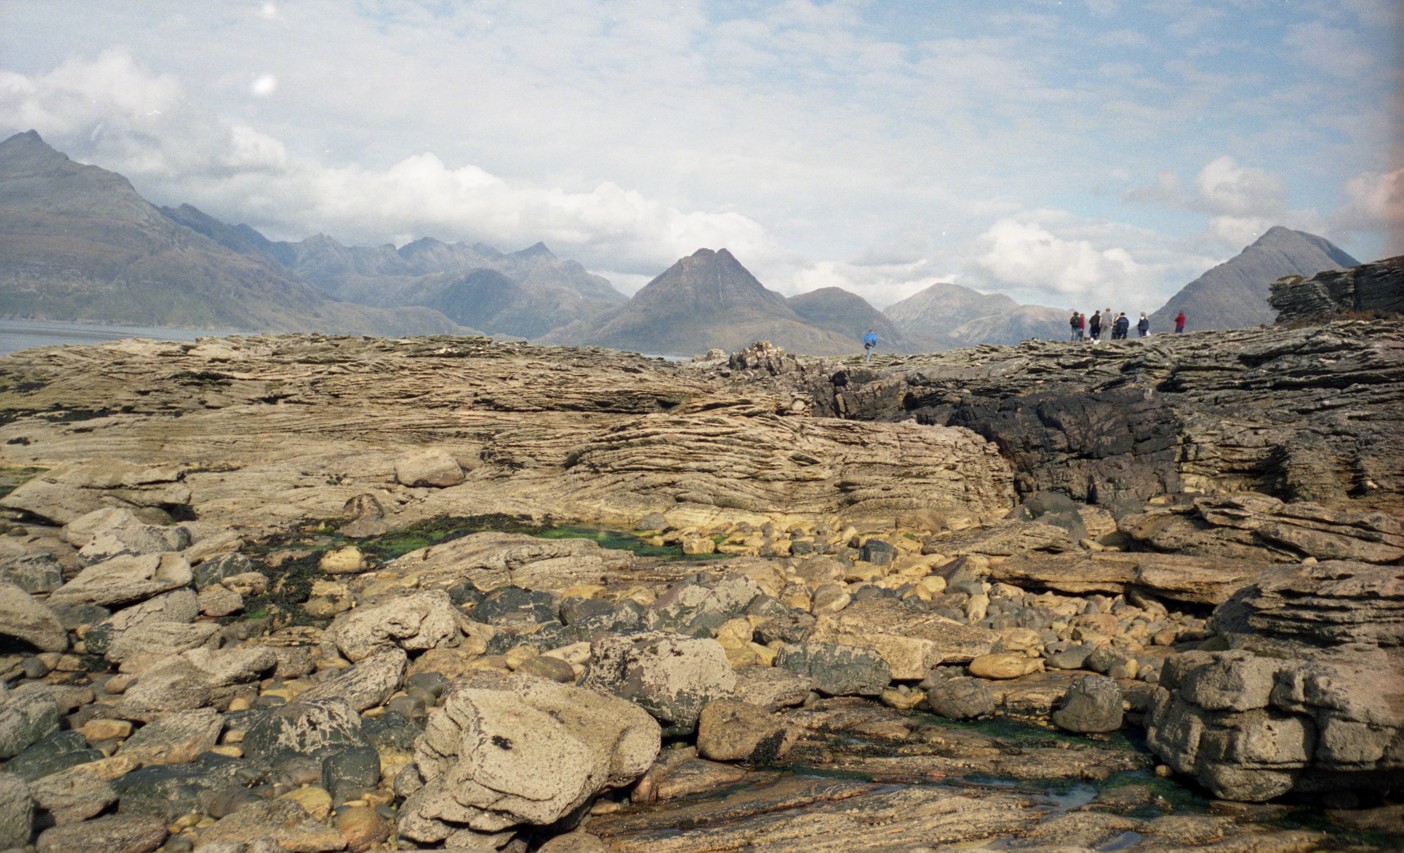 Middle Jurassic tidal sandstones near Elgol, with the Cuillin Mountains behind, Isle of Skye